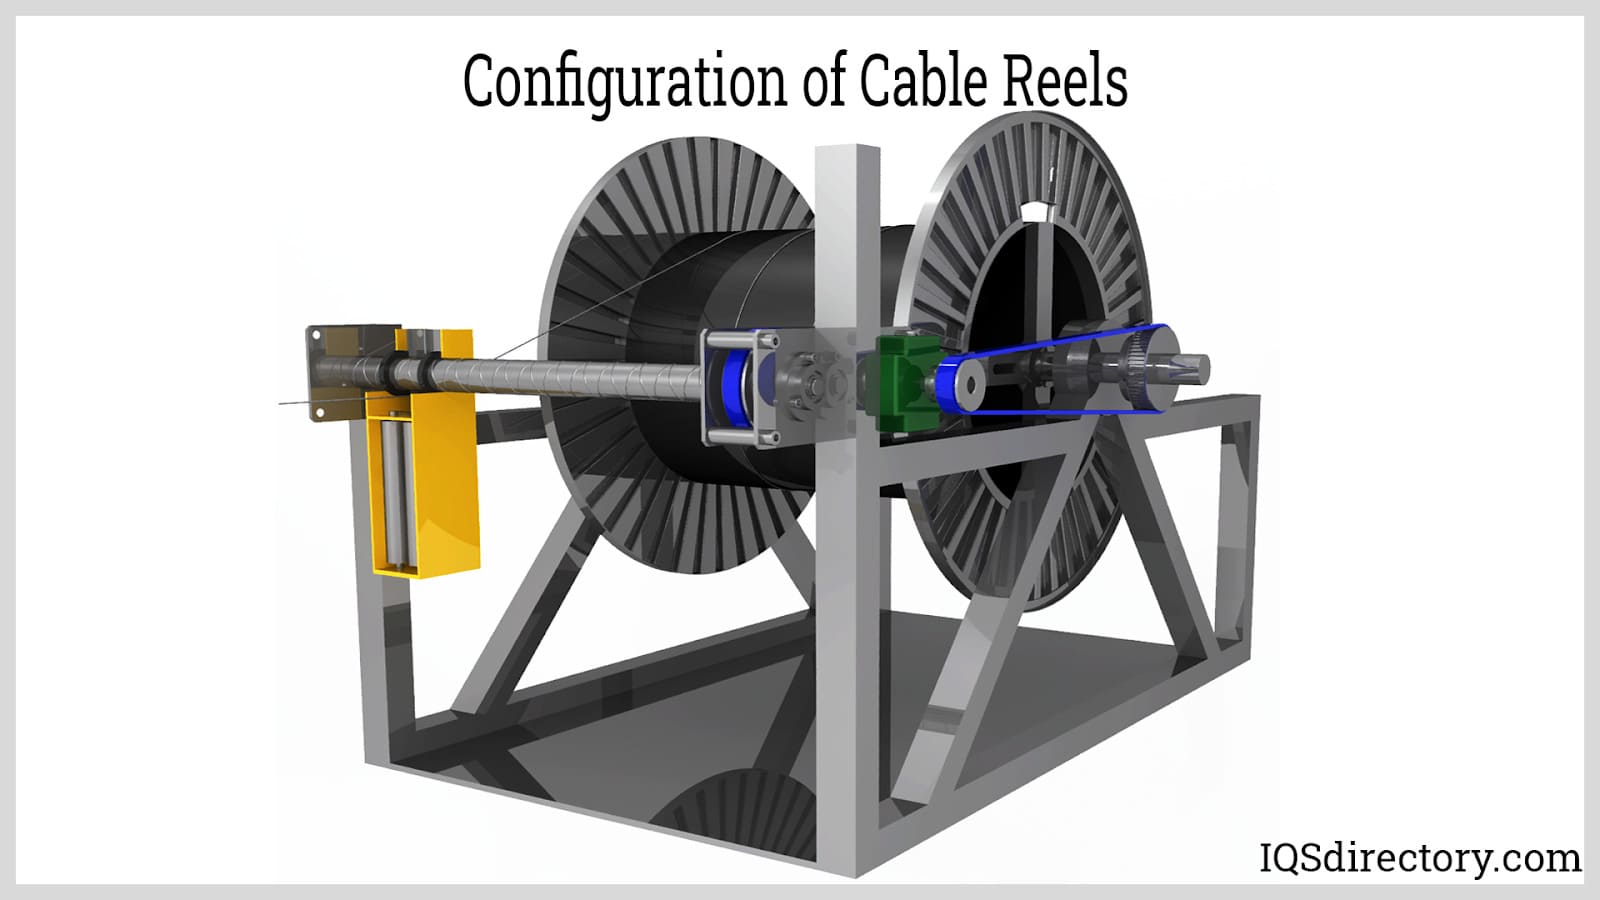 Configuration of Cable Reels